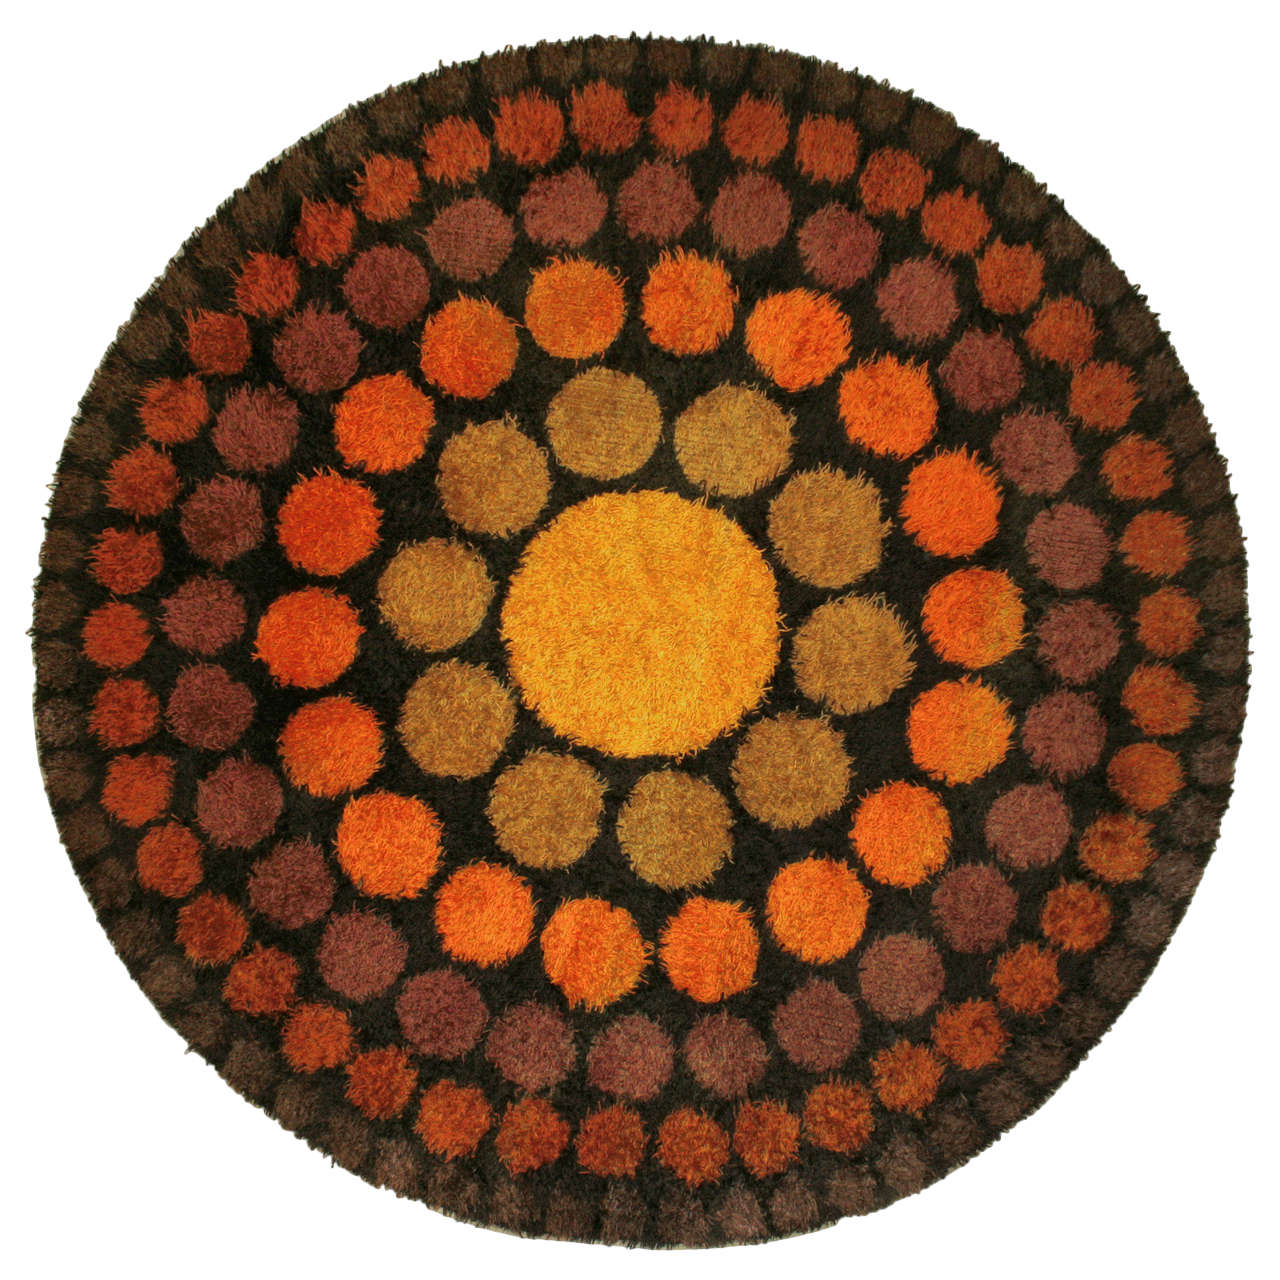 Roulette rug, 1965, offered by Alberto Levi Gallery